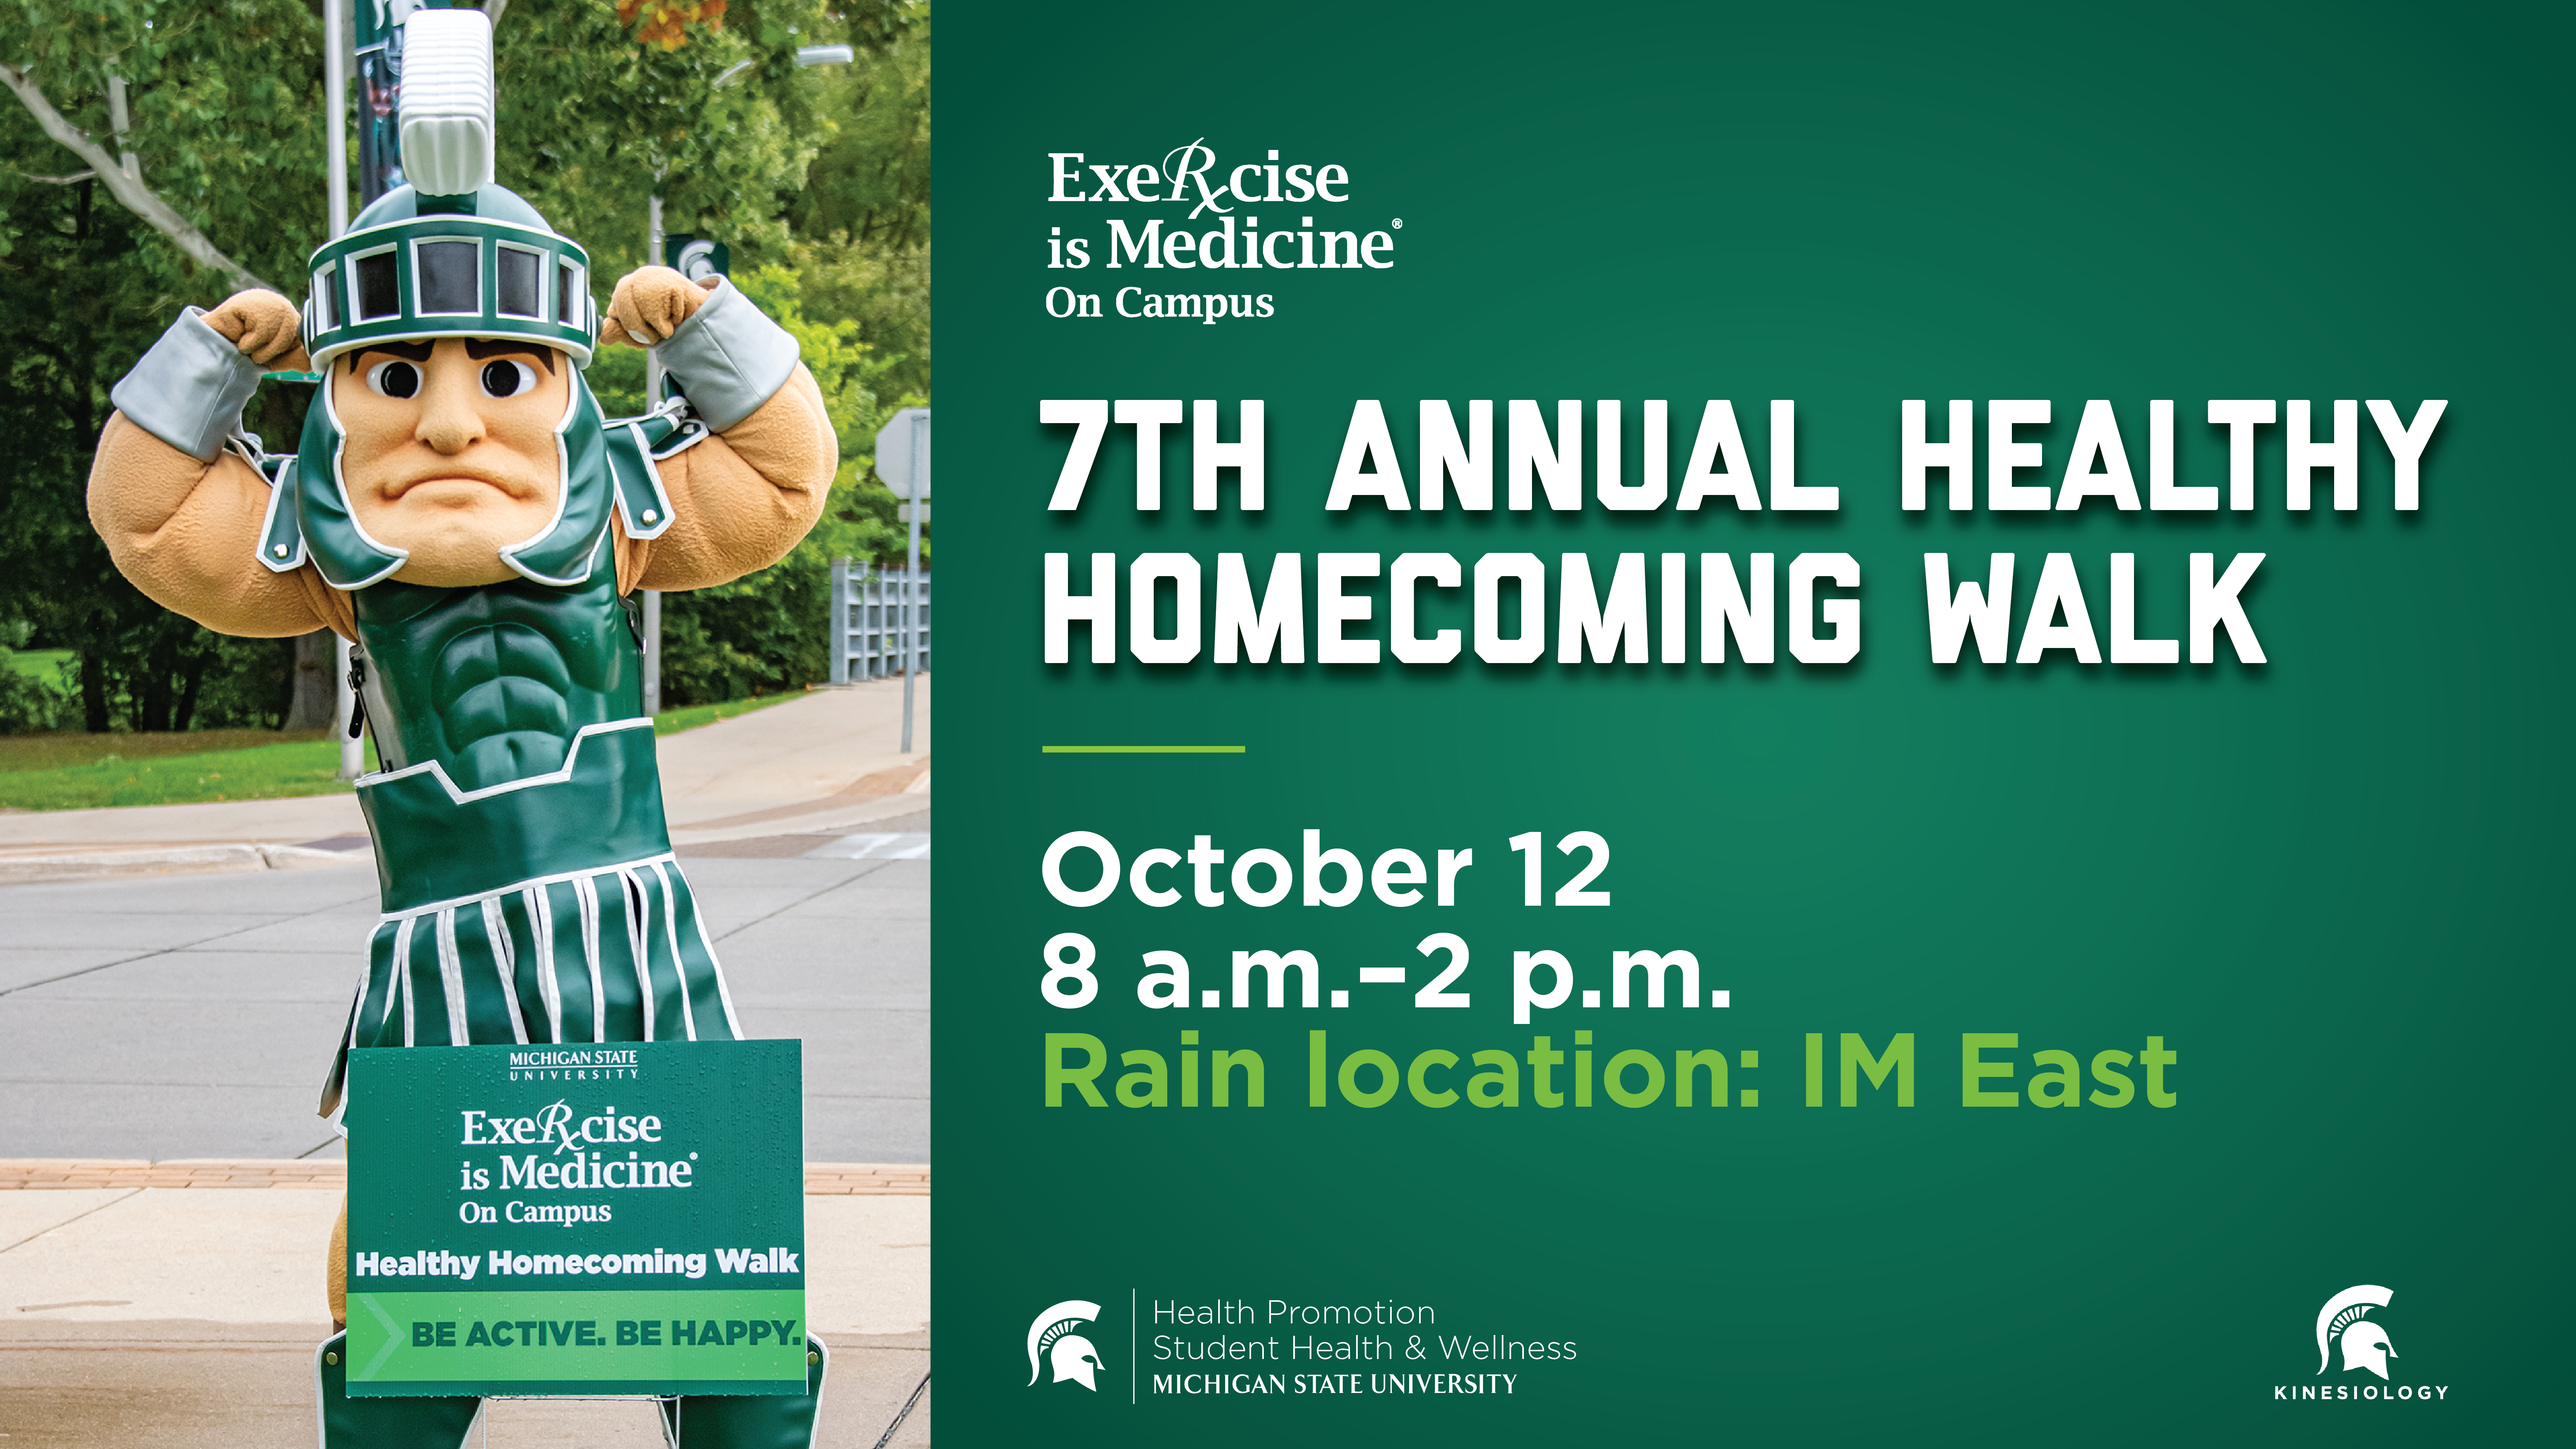 7th Annual Healthy Homecoming Walk to Take Place October 12